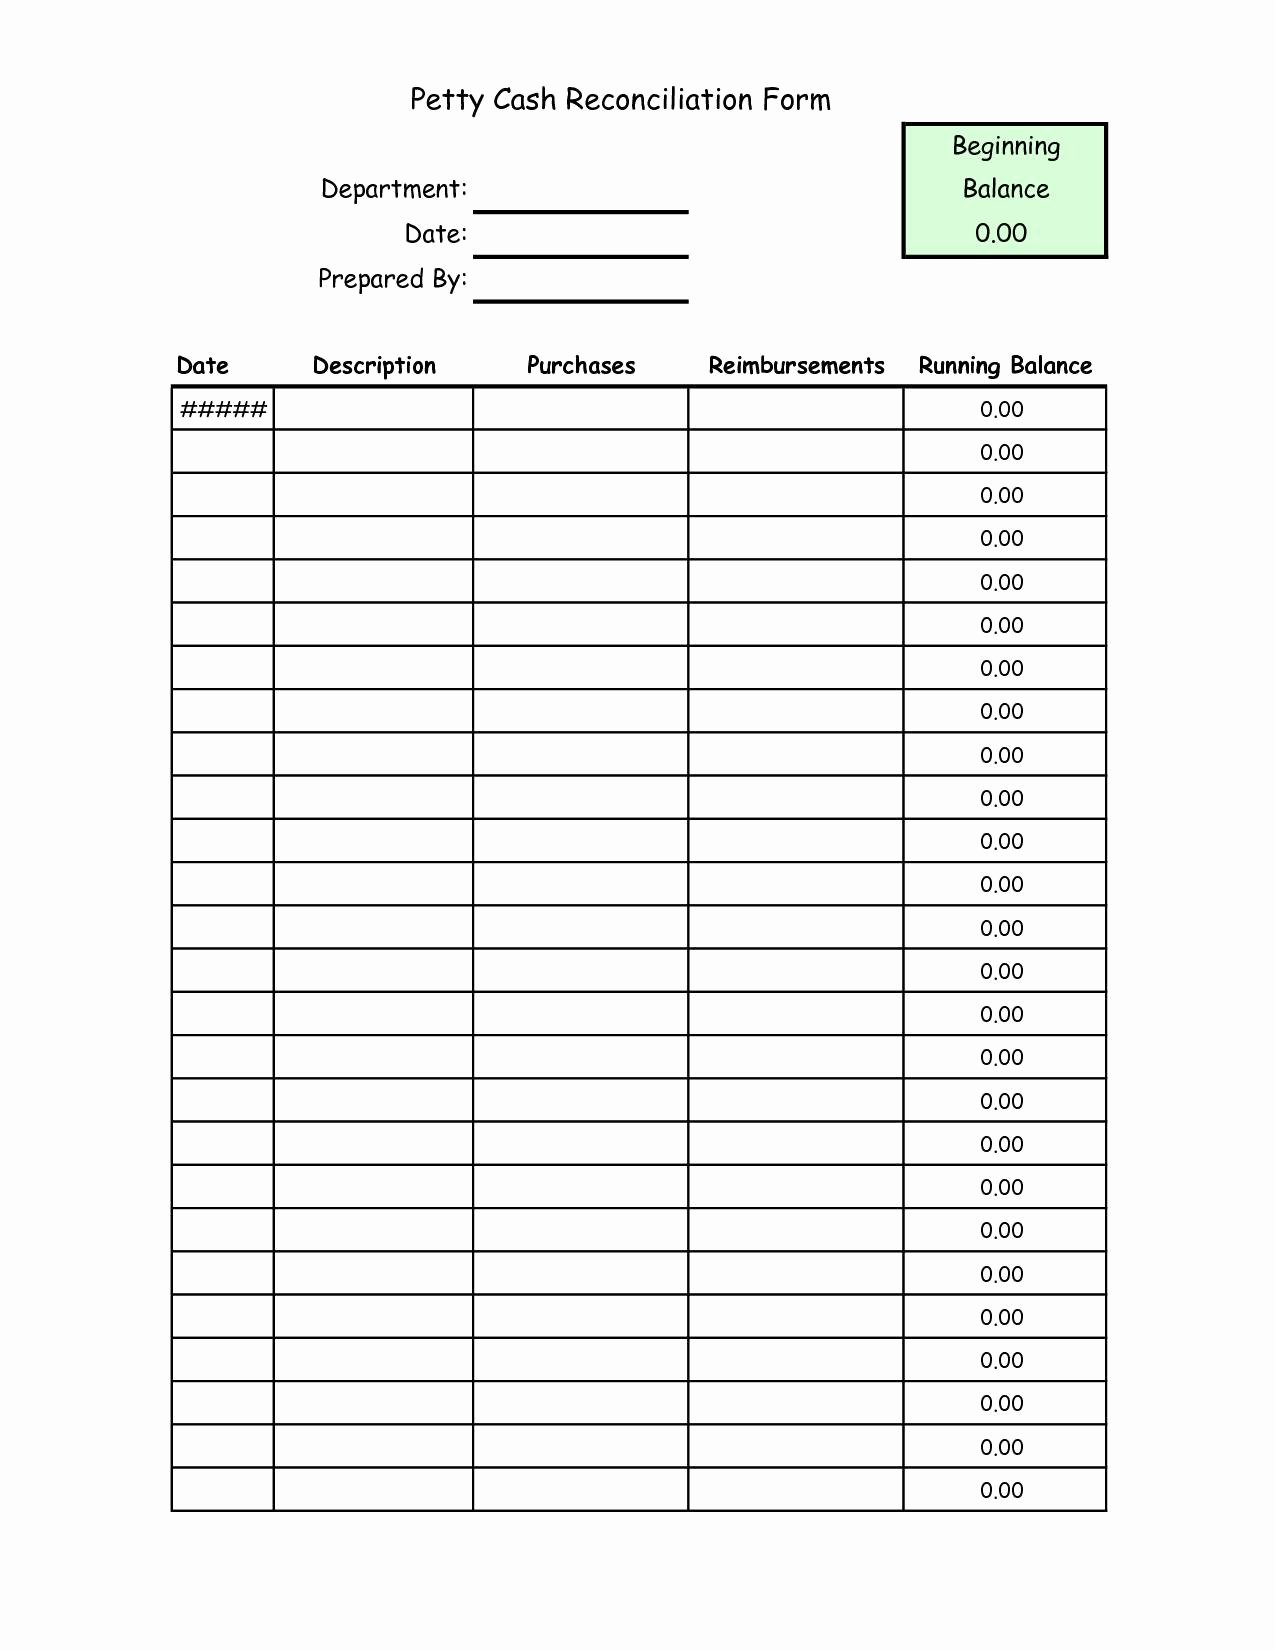 Daily Cash Sheet Template Excel Luxury Cash Reconciliation Template